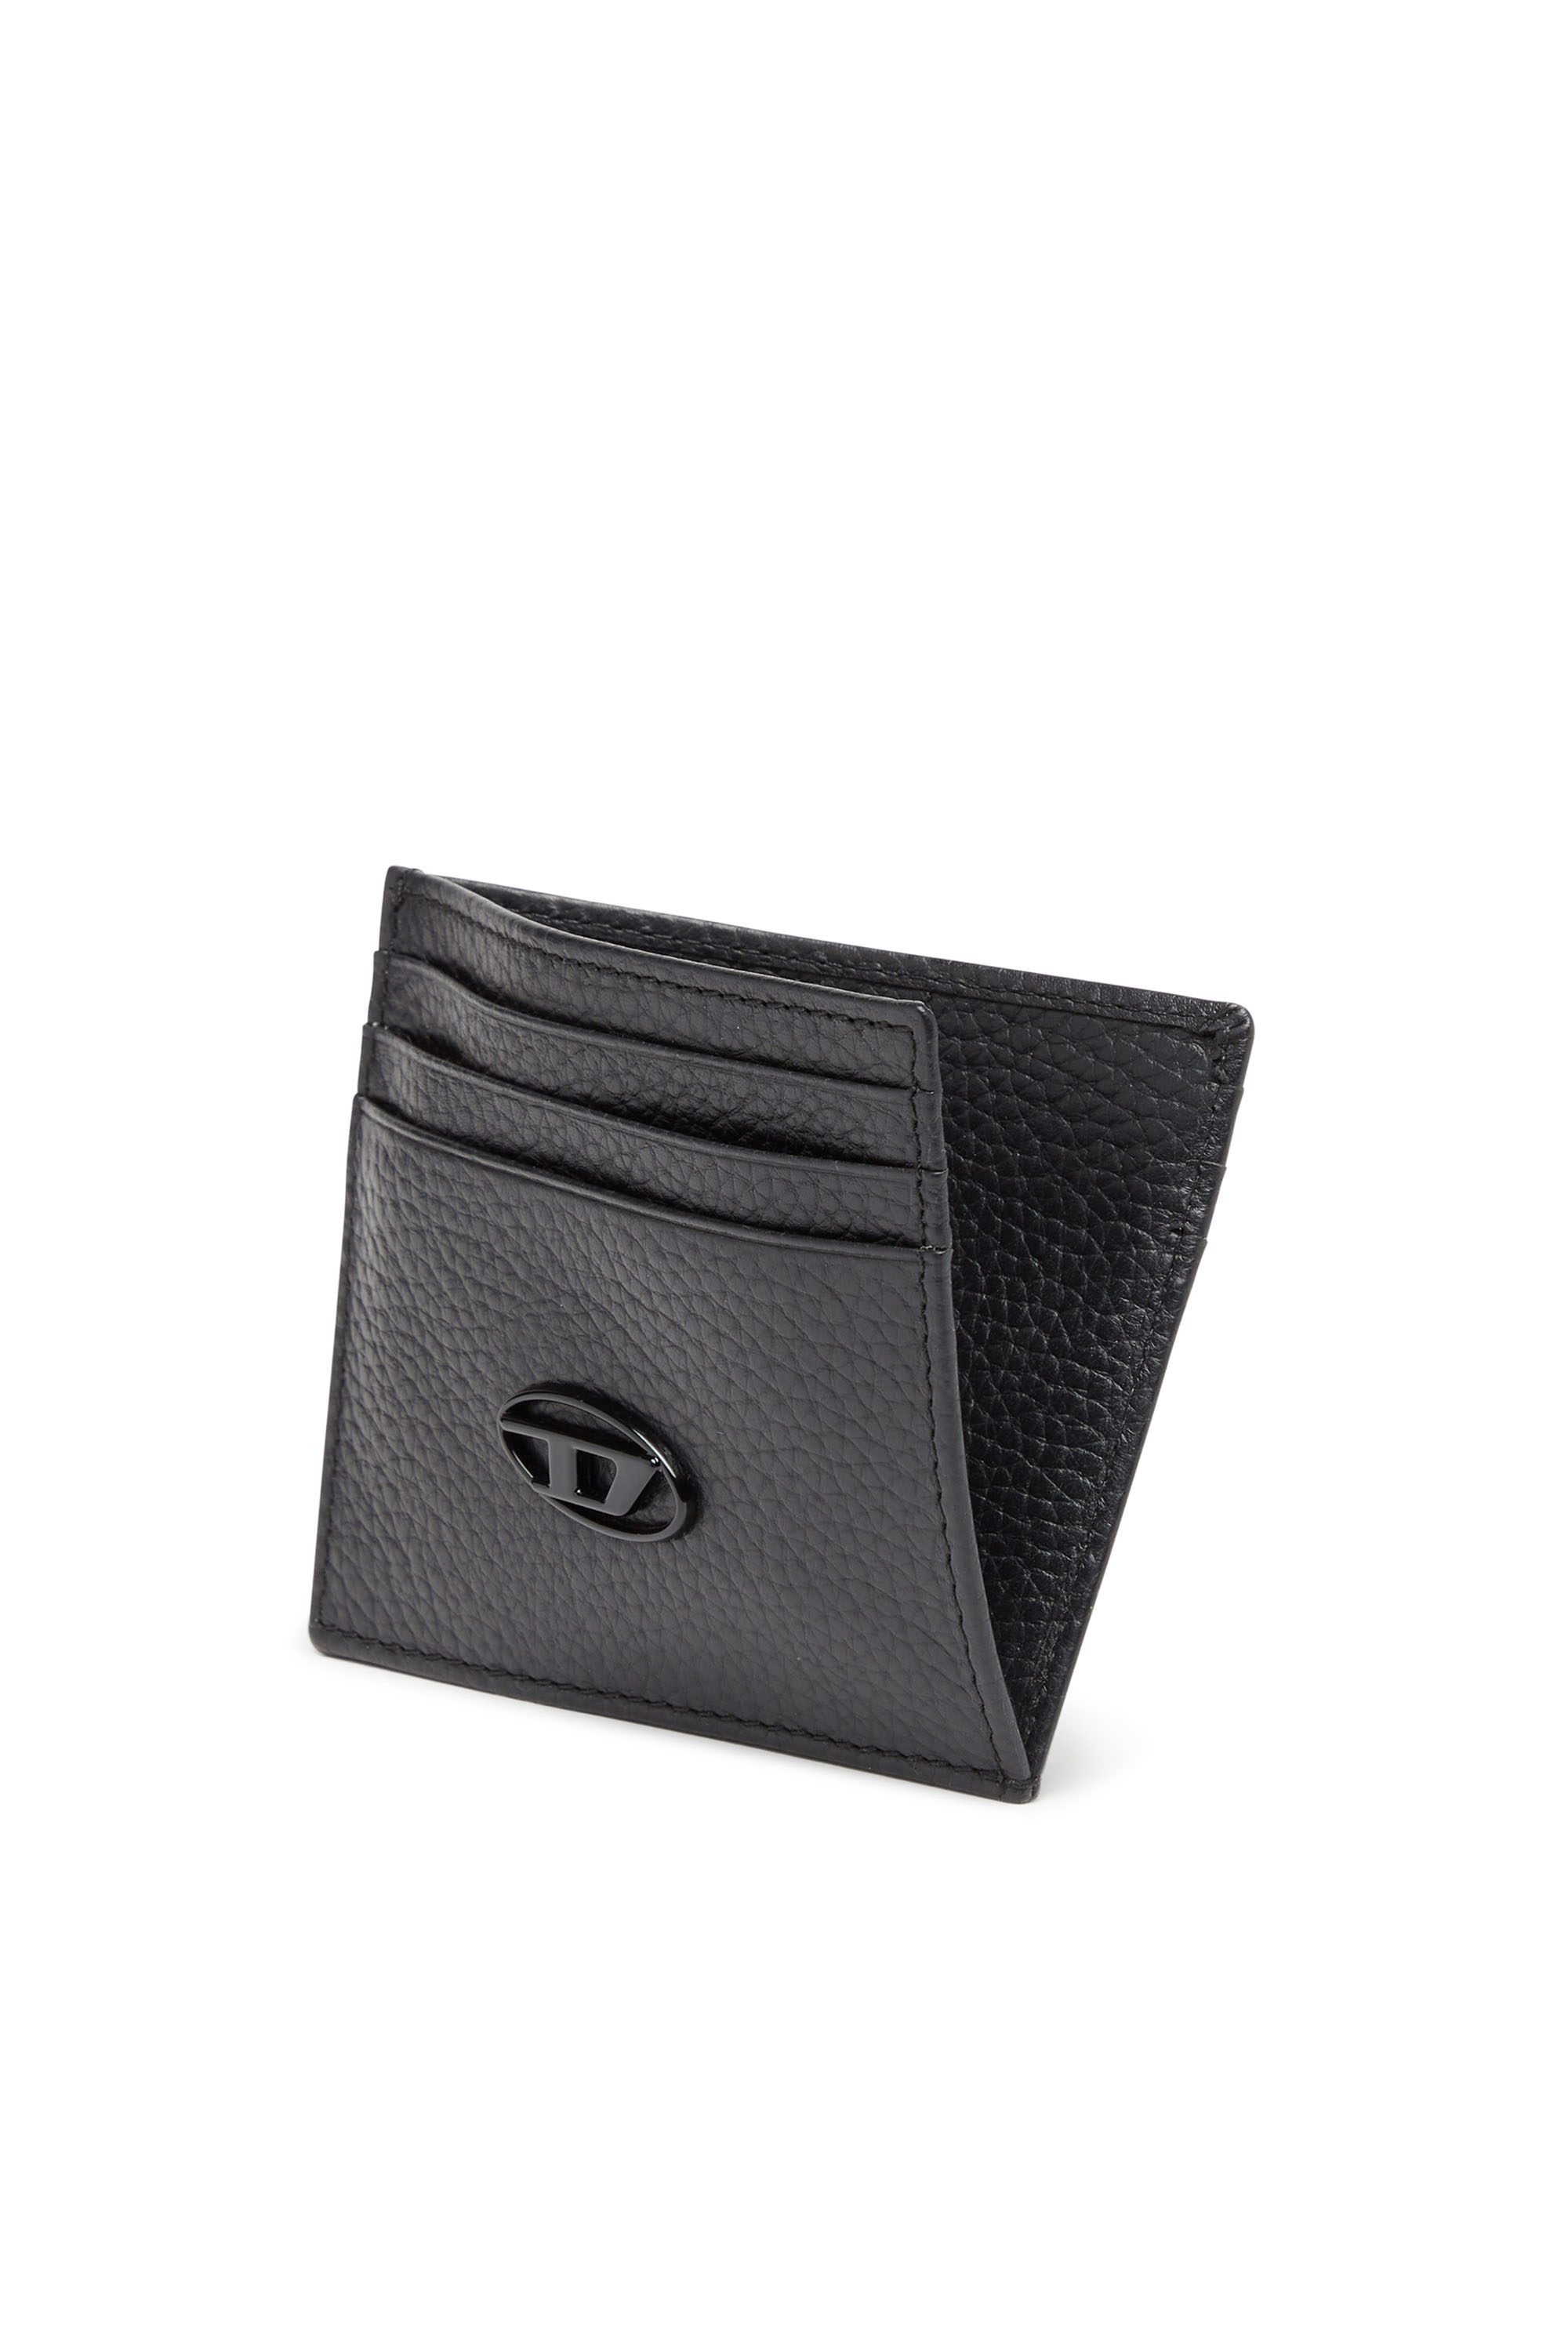 Diesel - CARD CASE, Man Card case in grained leather in Black - Image 4